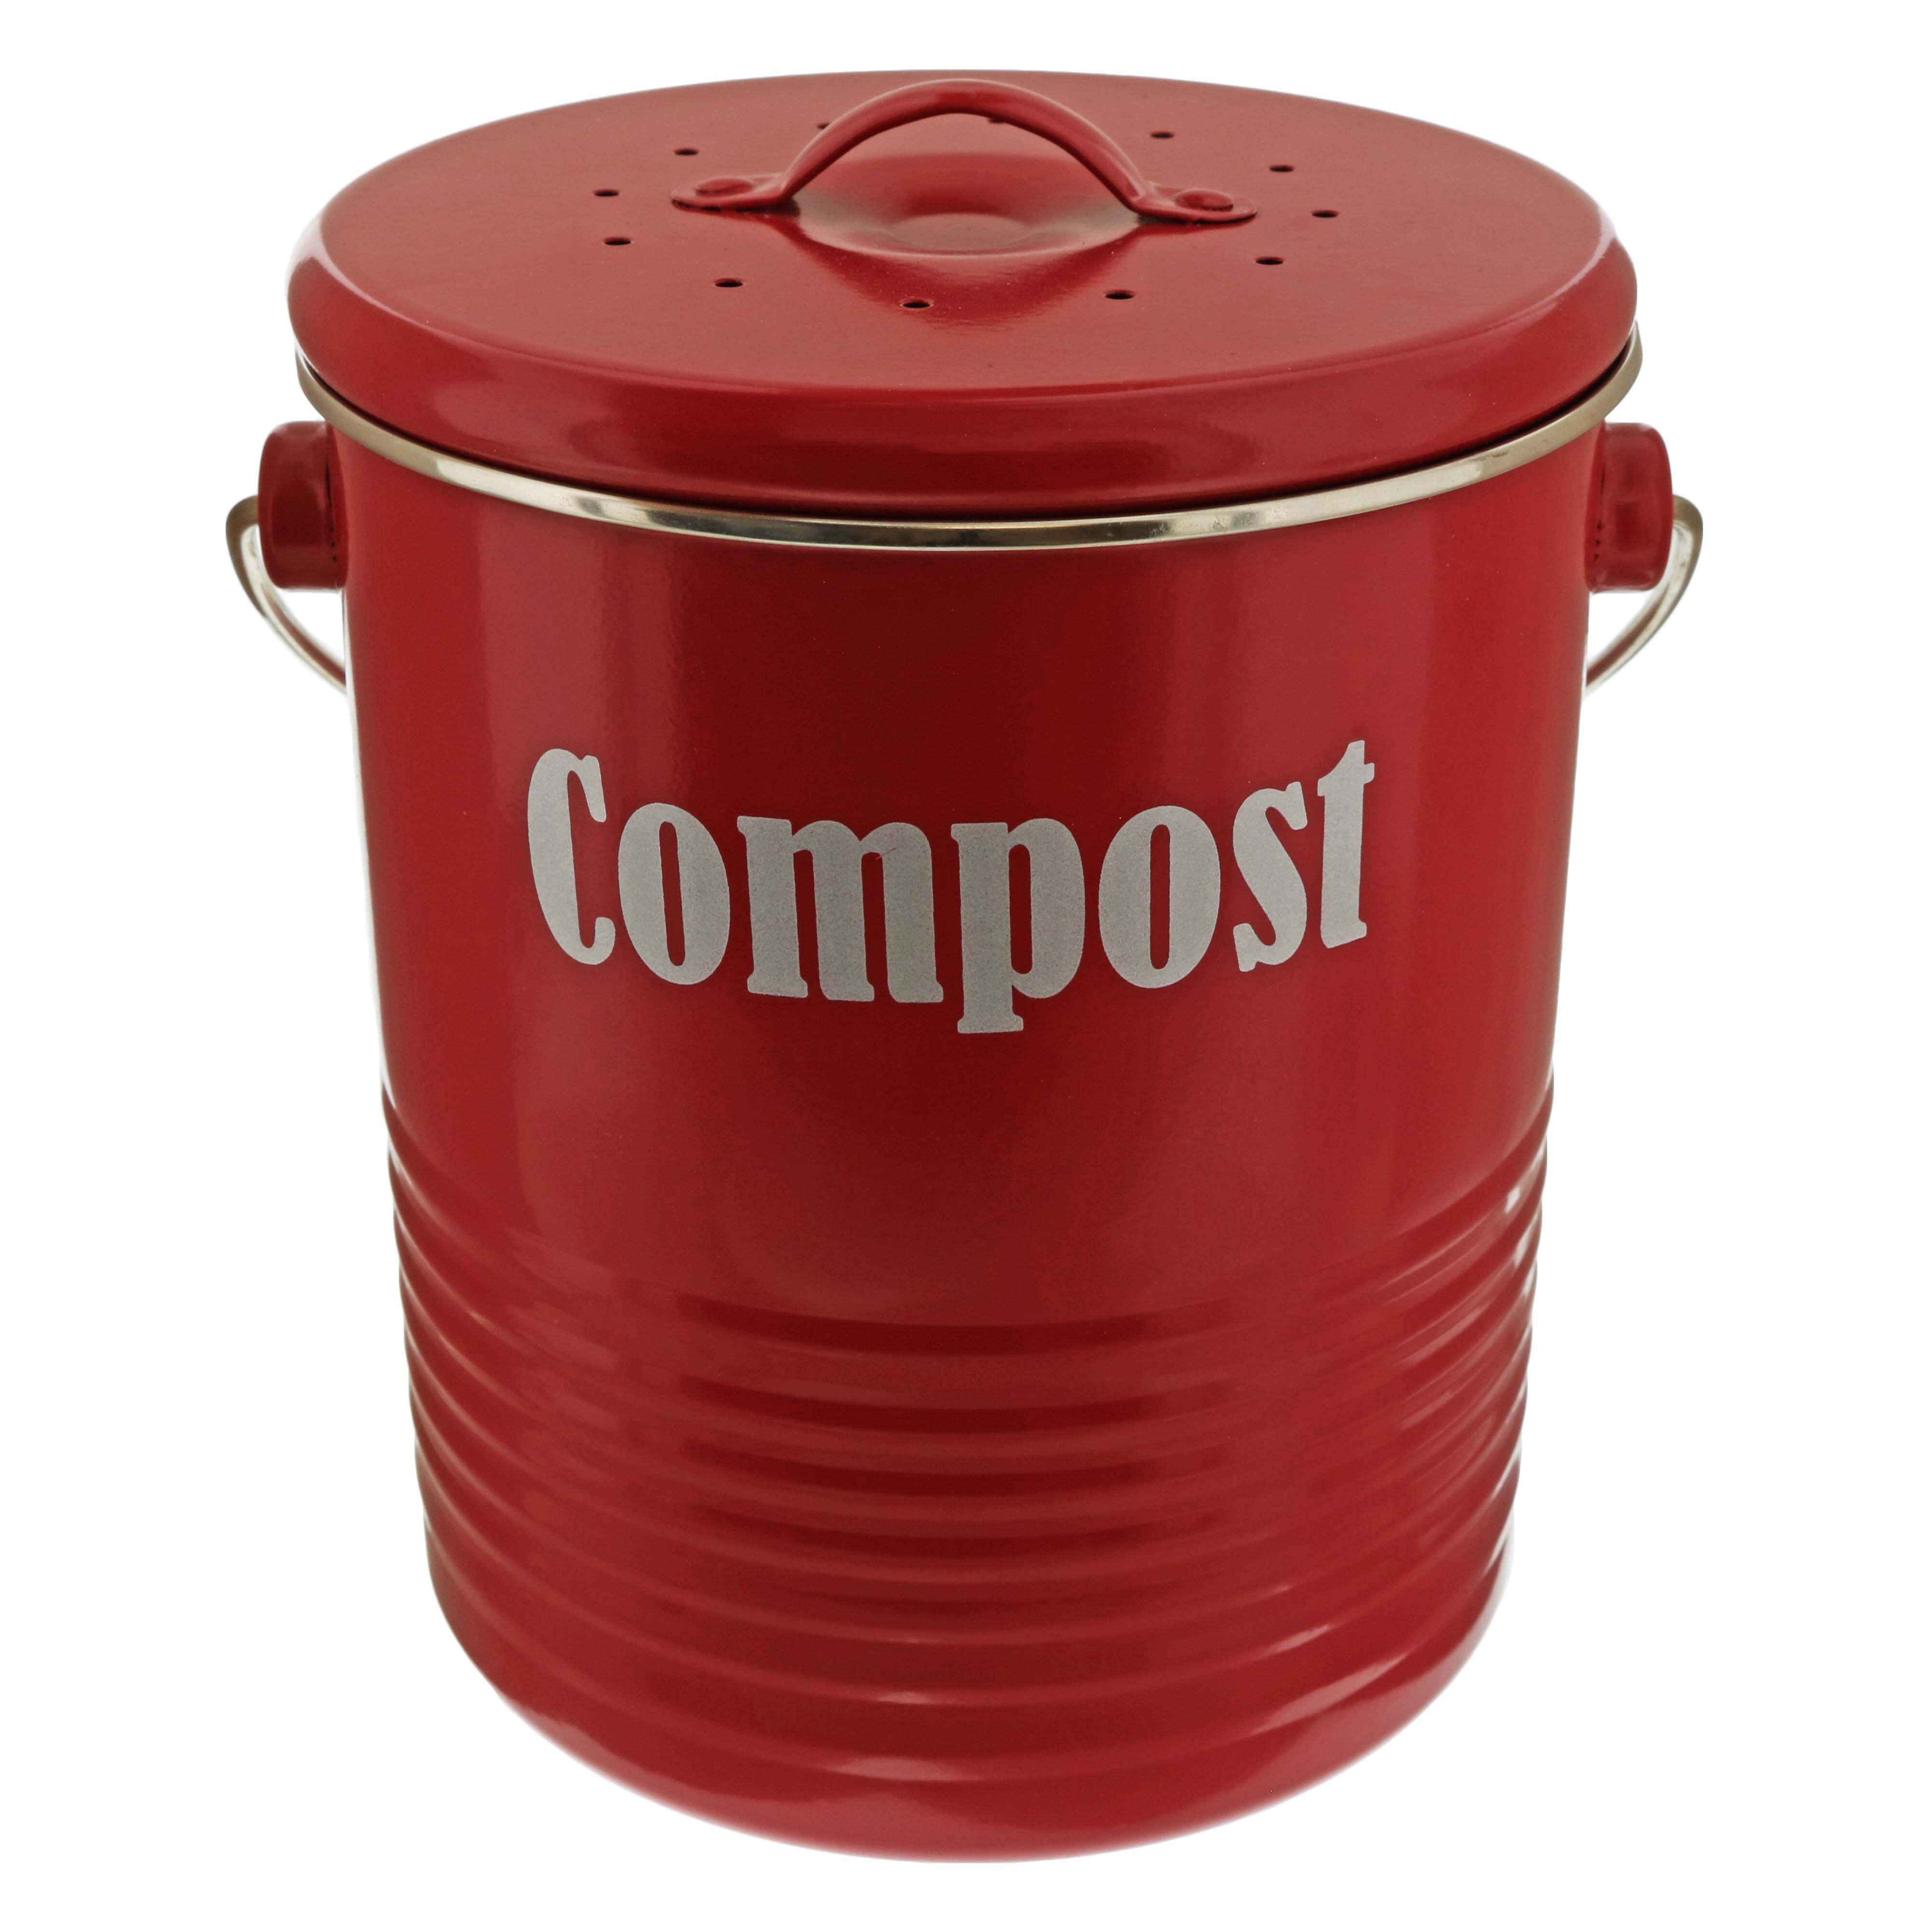 Aap Agnes Gray Redelijk Typhoon Vintage Red Compost Caddy - Shop Kitchen & Dining at H-E-B